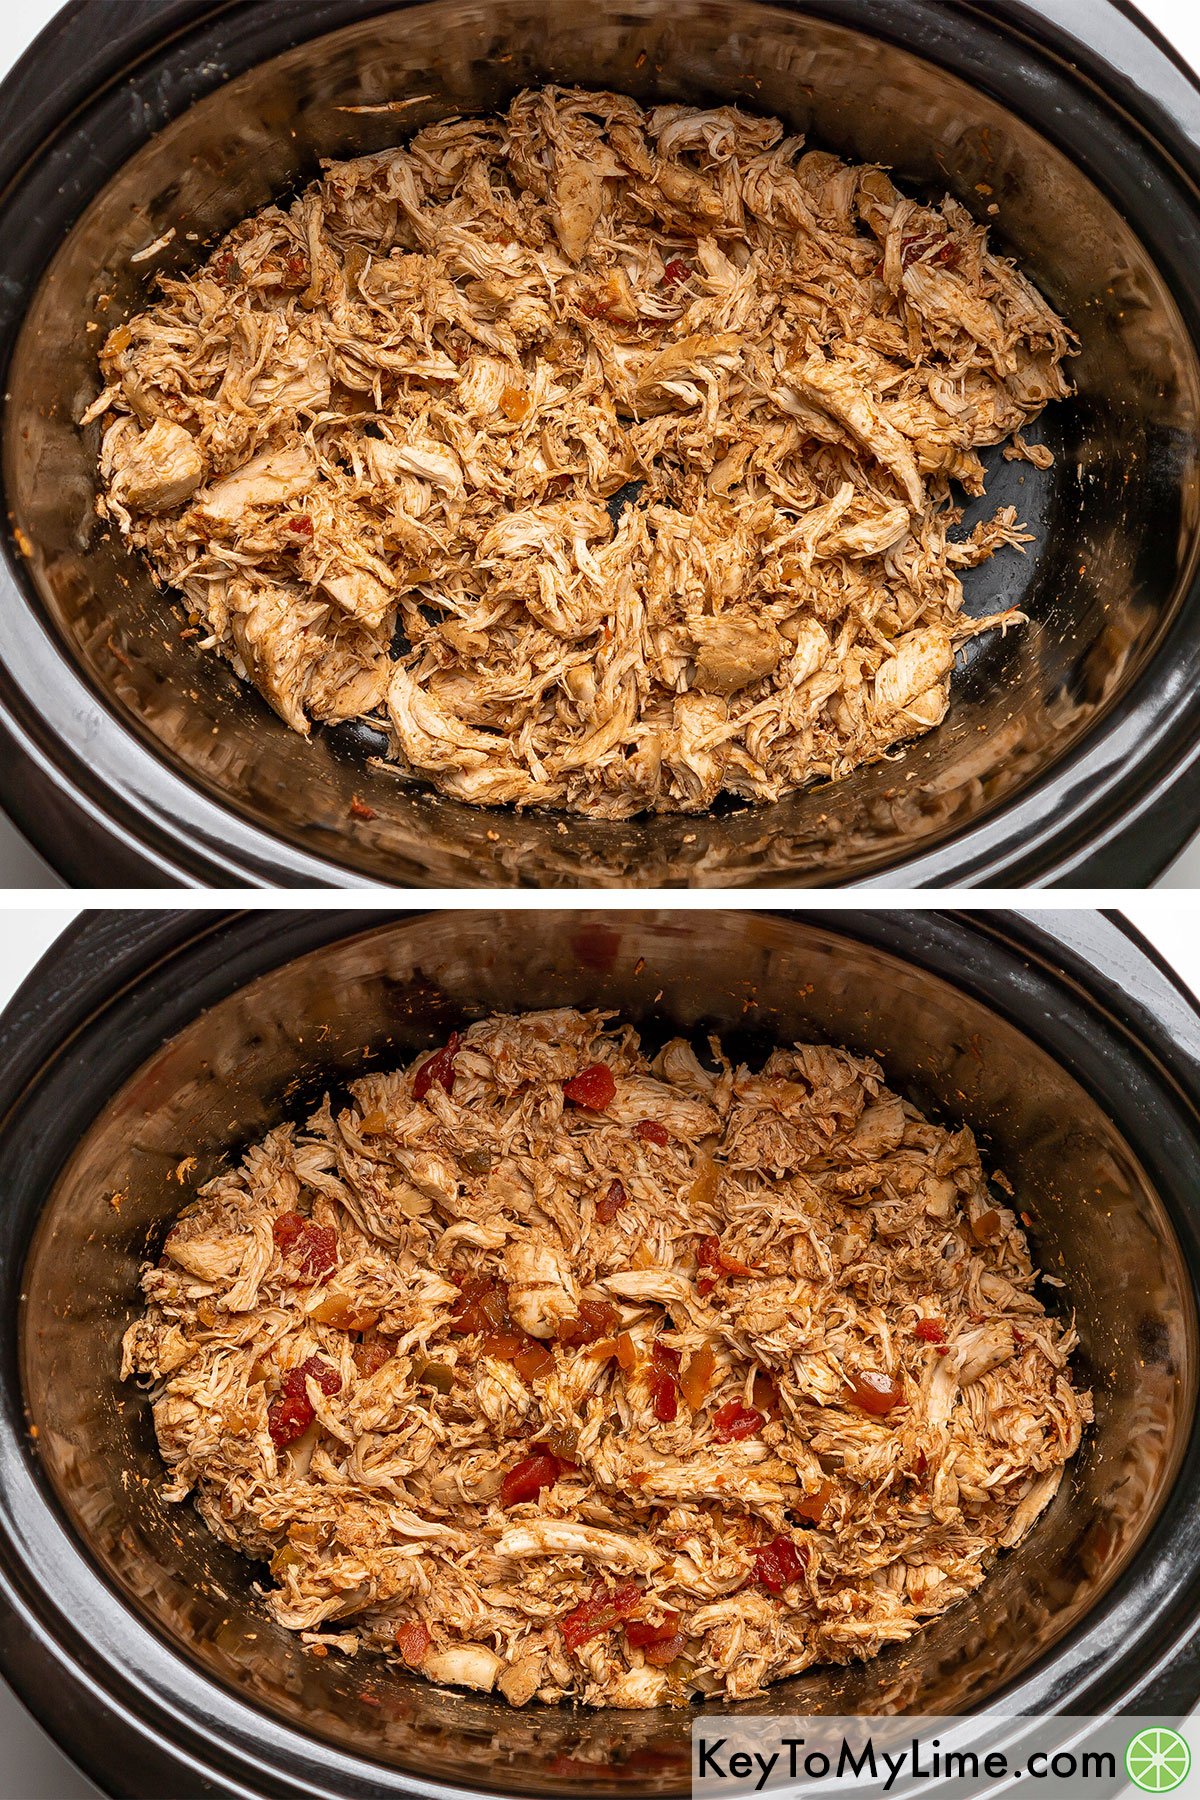 Shredding cooked chicken in a slow cooker, then mixing in salsa.